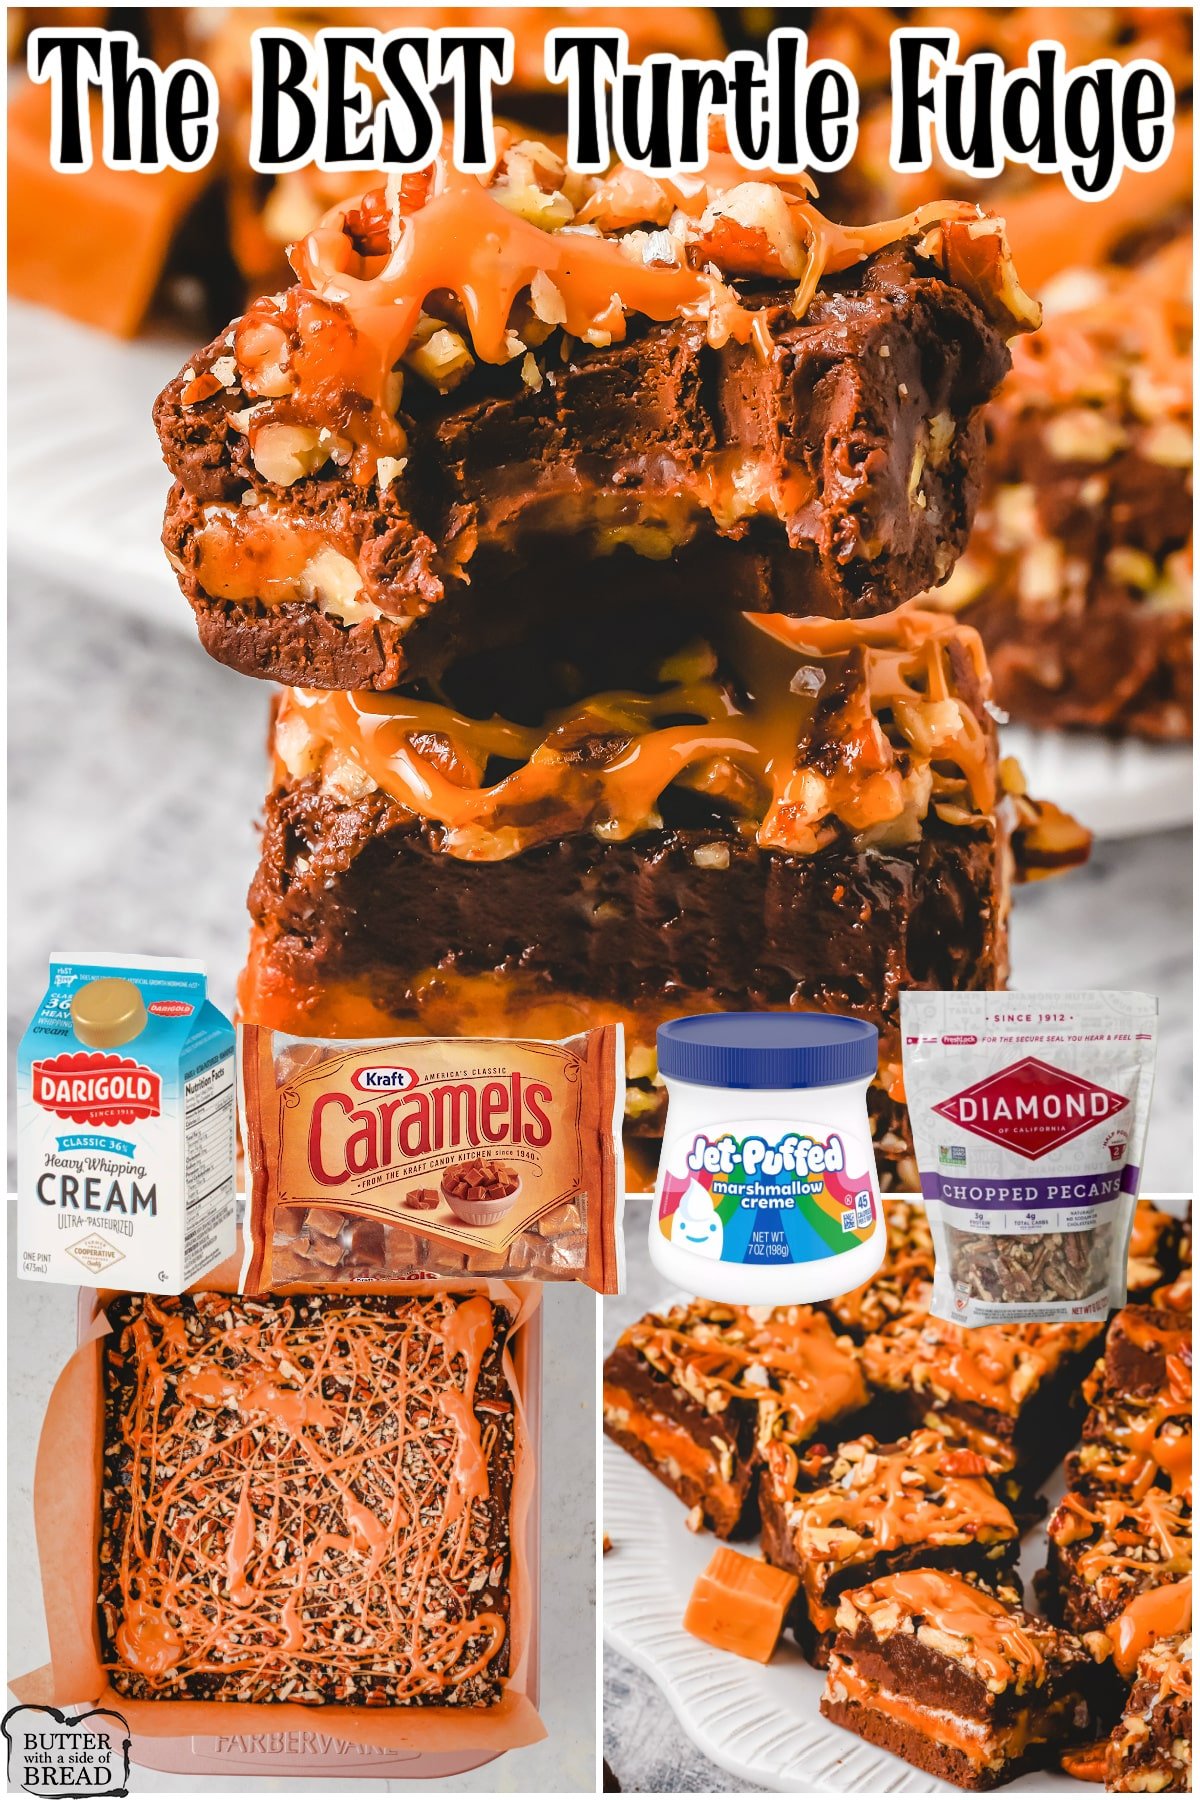 Turtle fudge recipe made with layers of smooth chocolate fudge, crunchy pecans, & creamy caramels. Caramel pecan fudge perfect for holiday dessert trays!